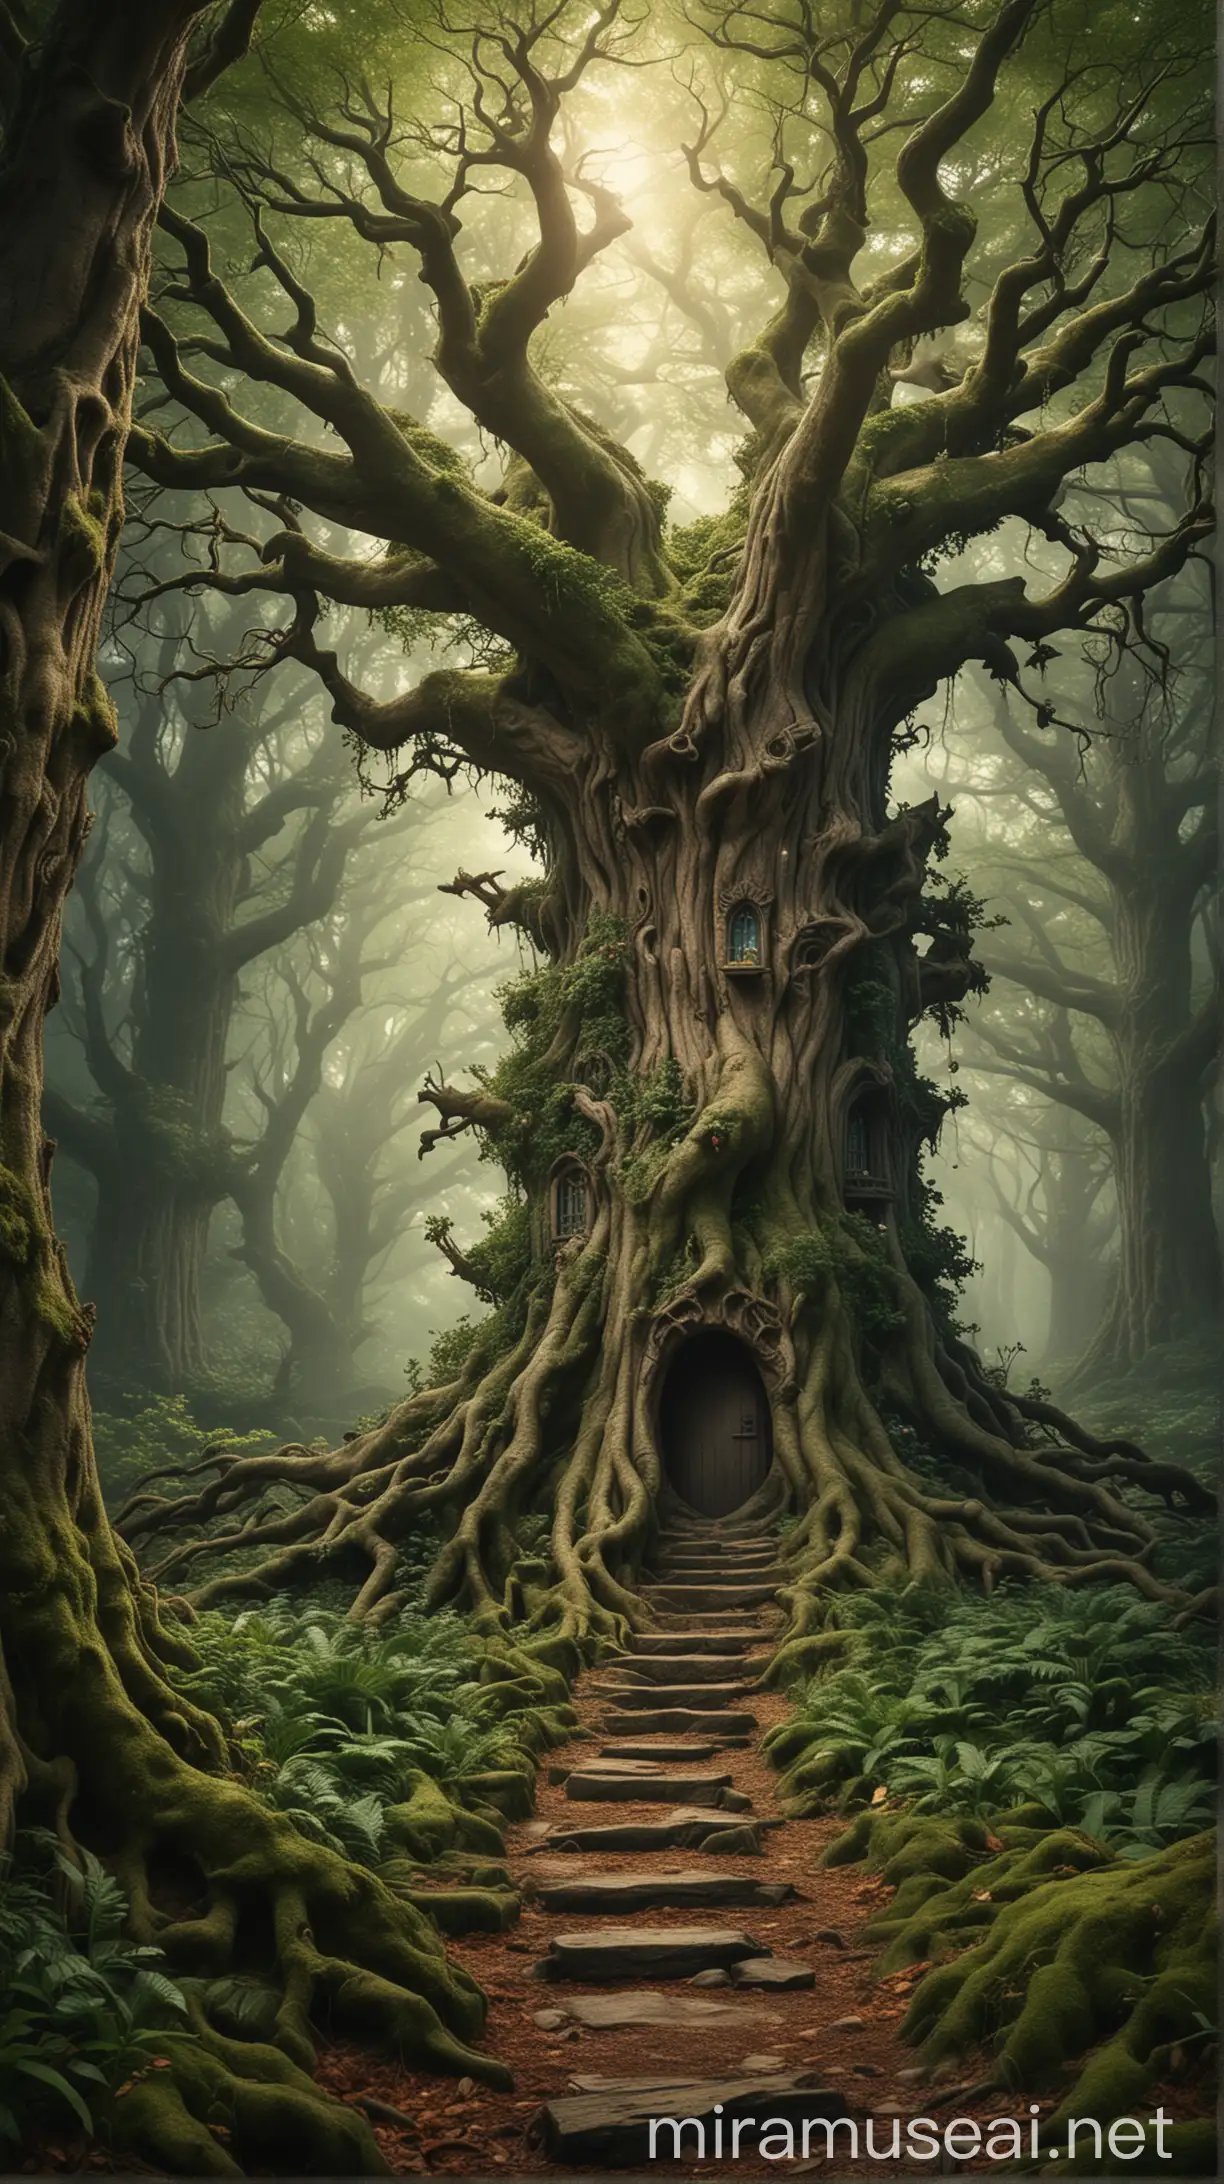 Enchanted Realm Mystical Forest with Wise Old Tree